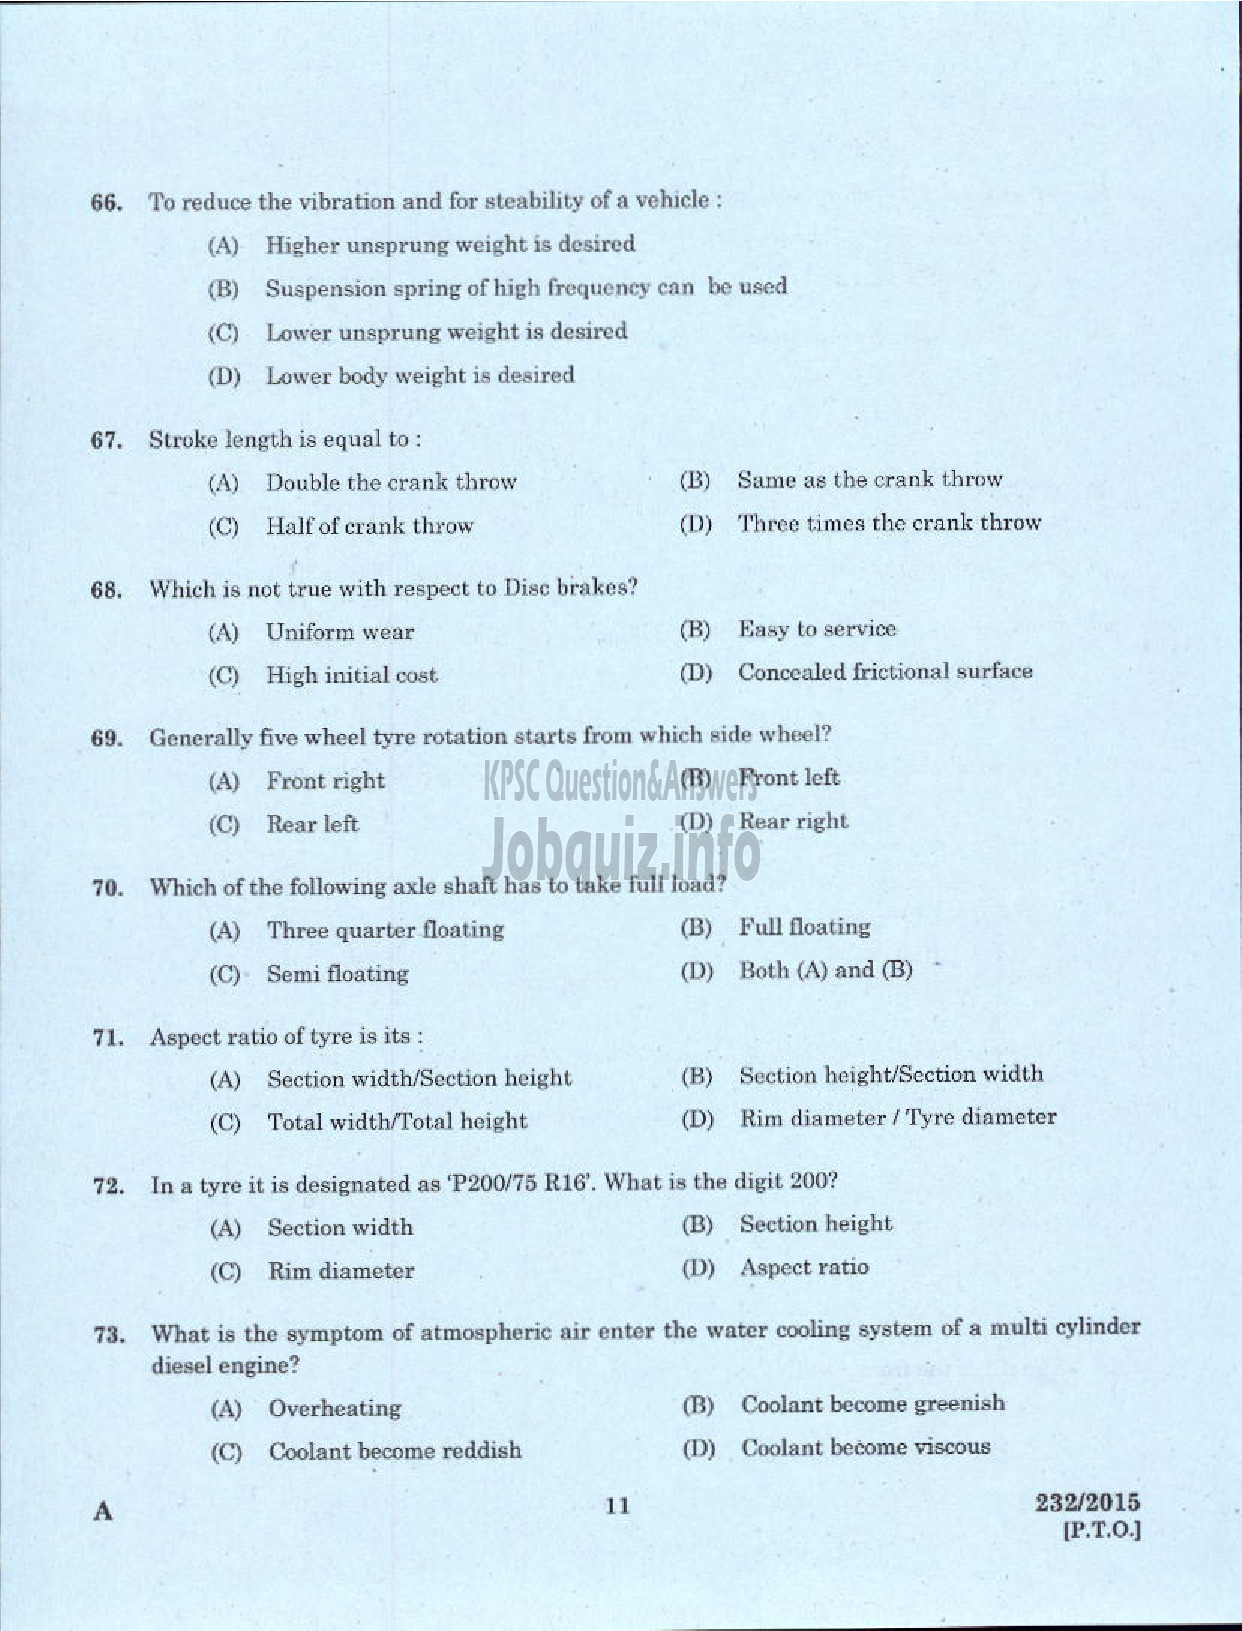 Kerala PSC Question Paper - MOTOR MECHANIC/STORE ASSISTANT GROUND WATER-9